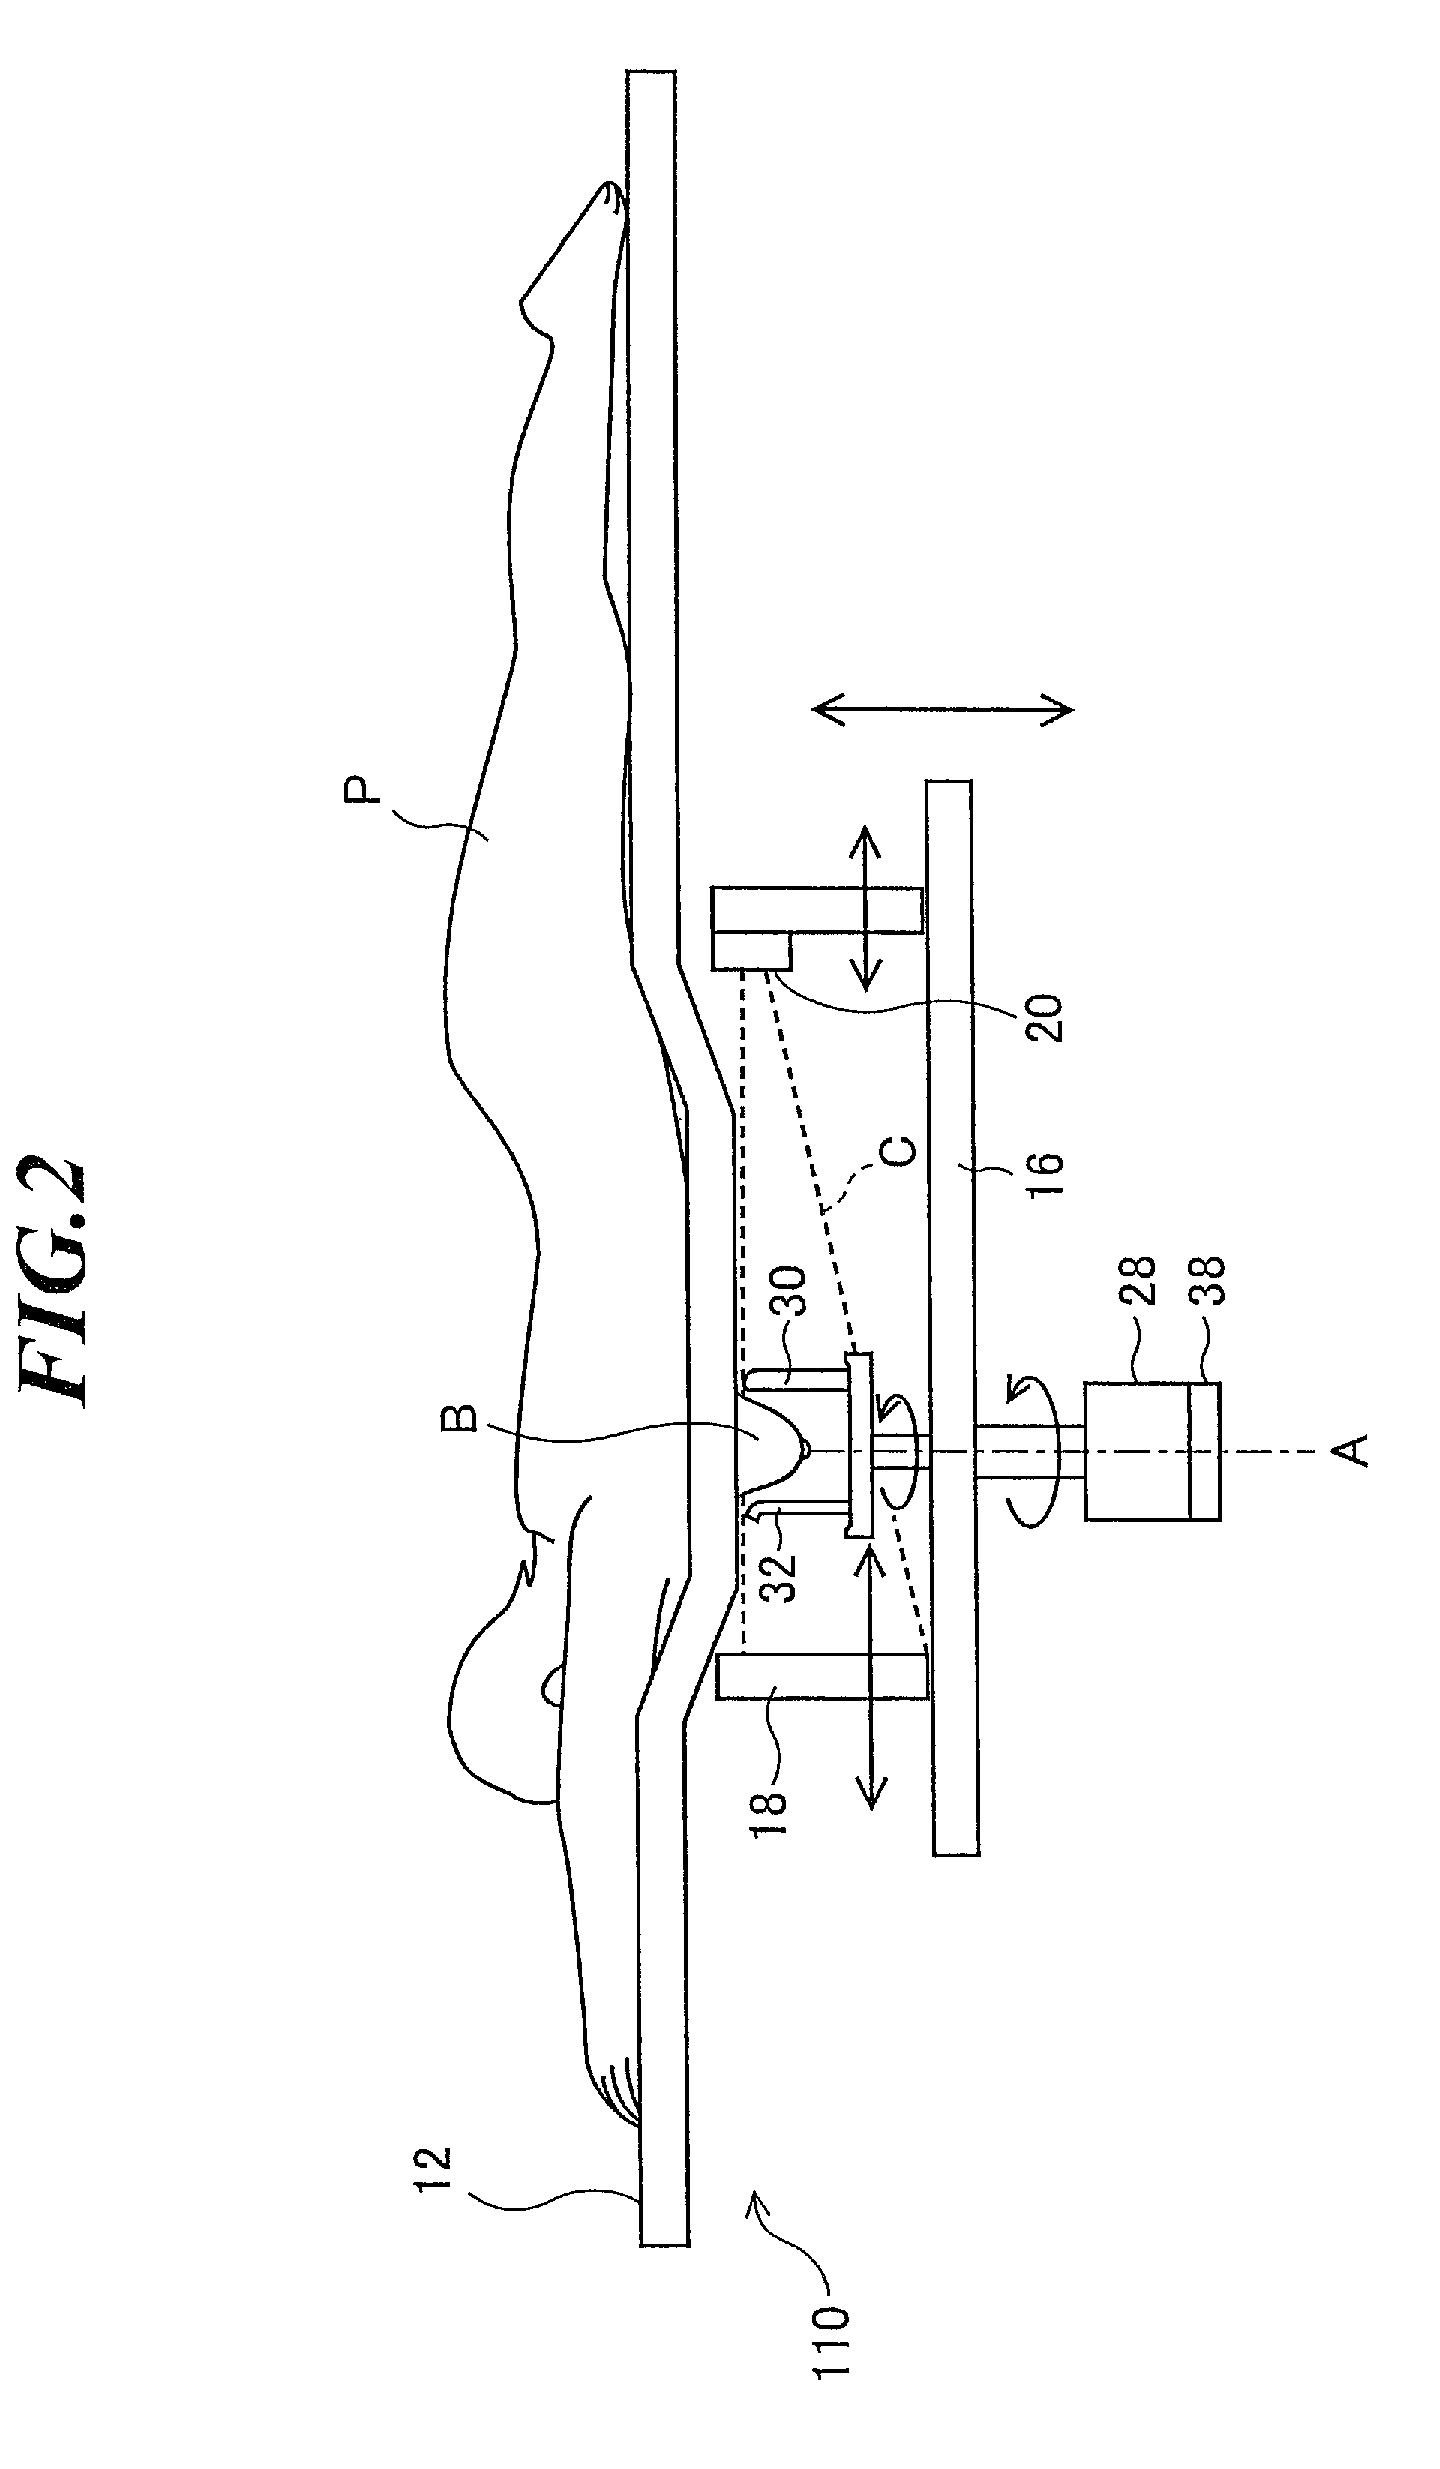 Radiation imaging apparatus and method for breast